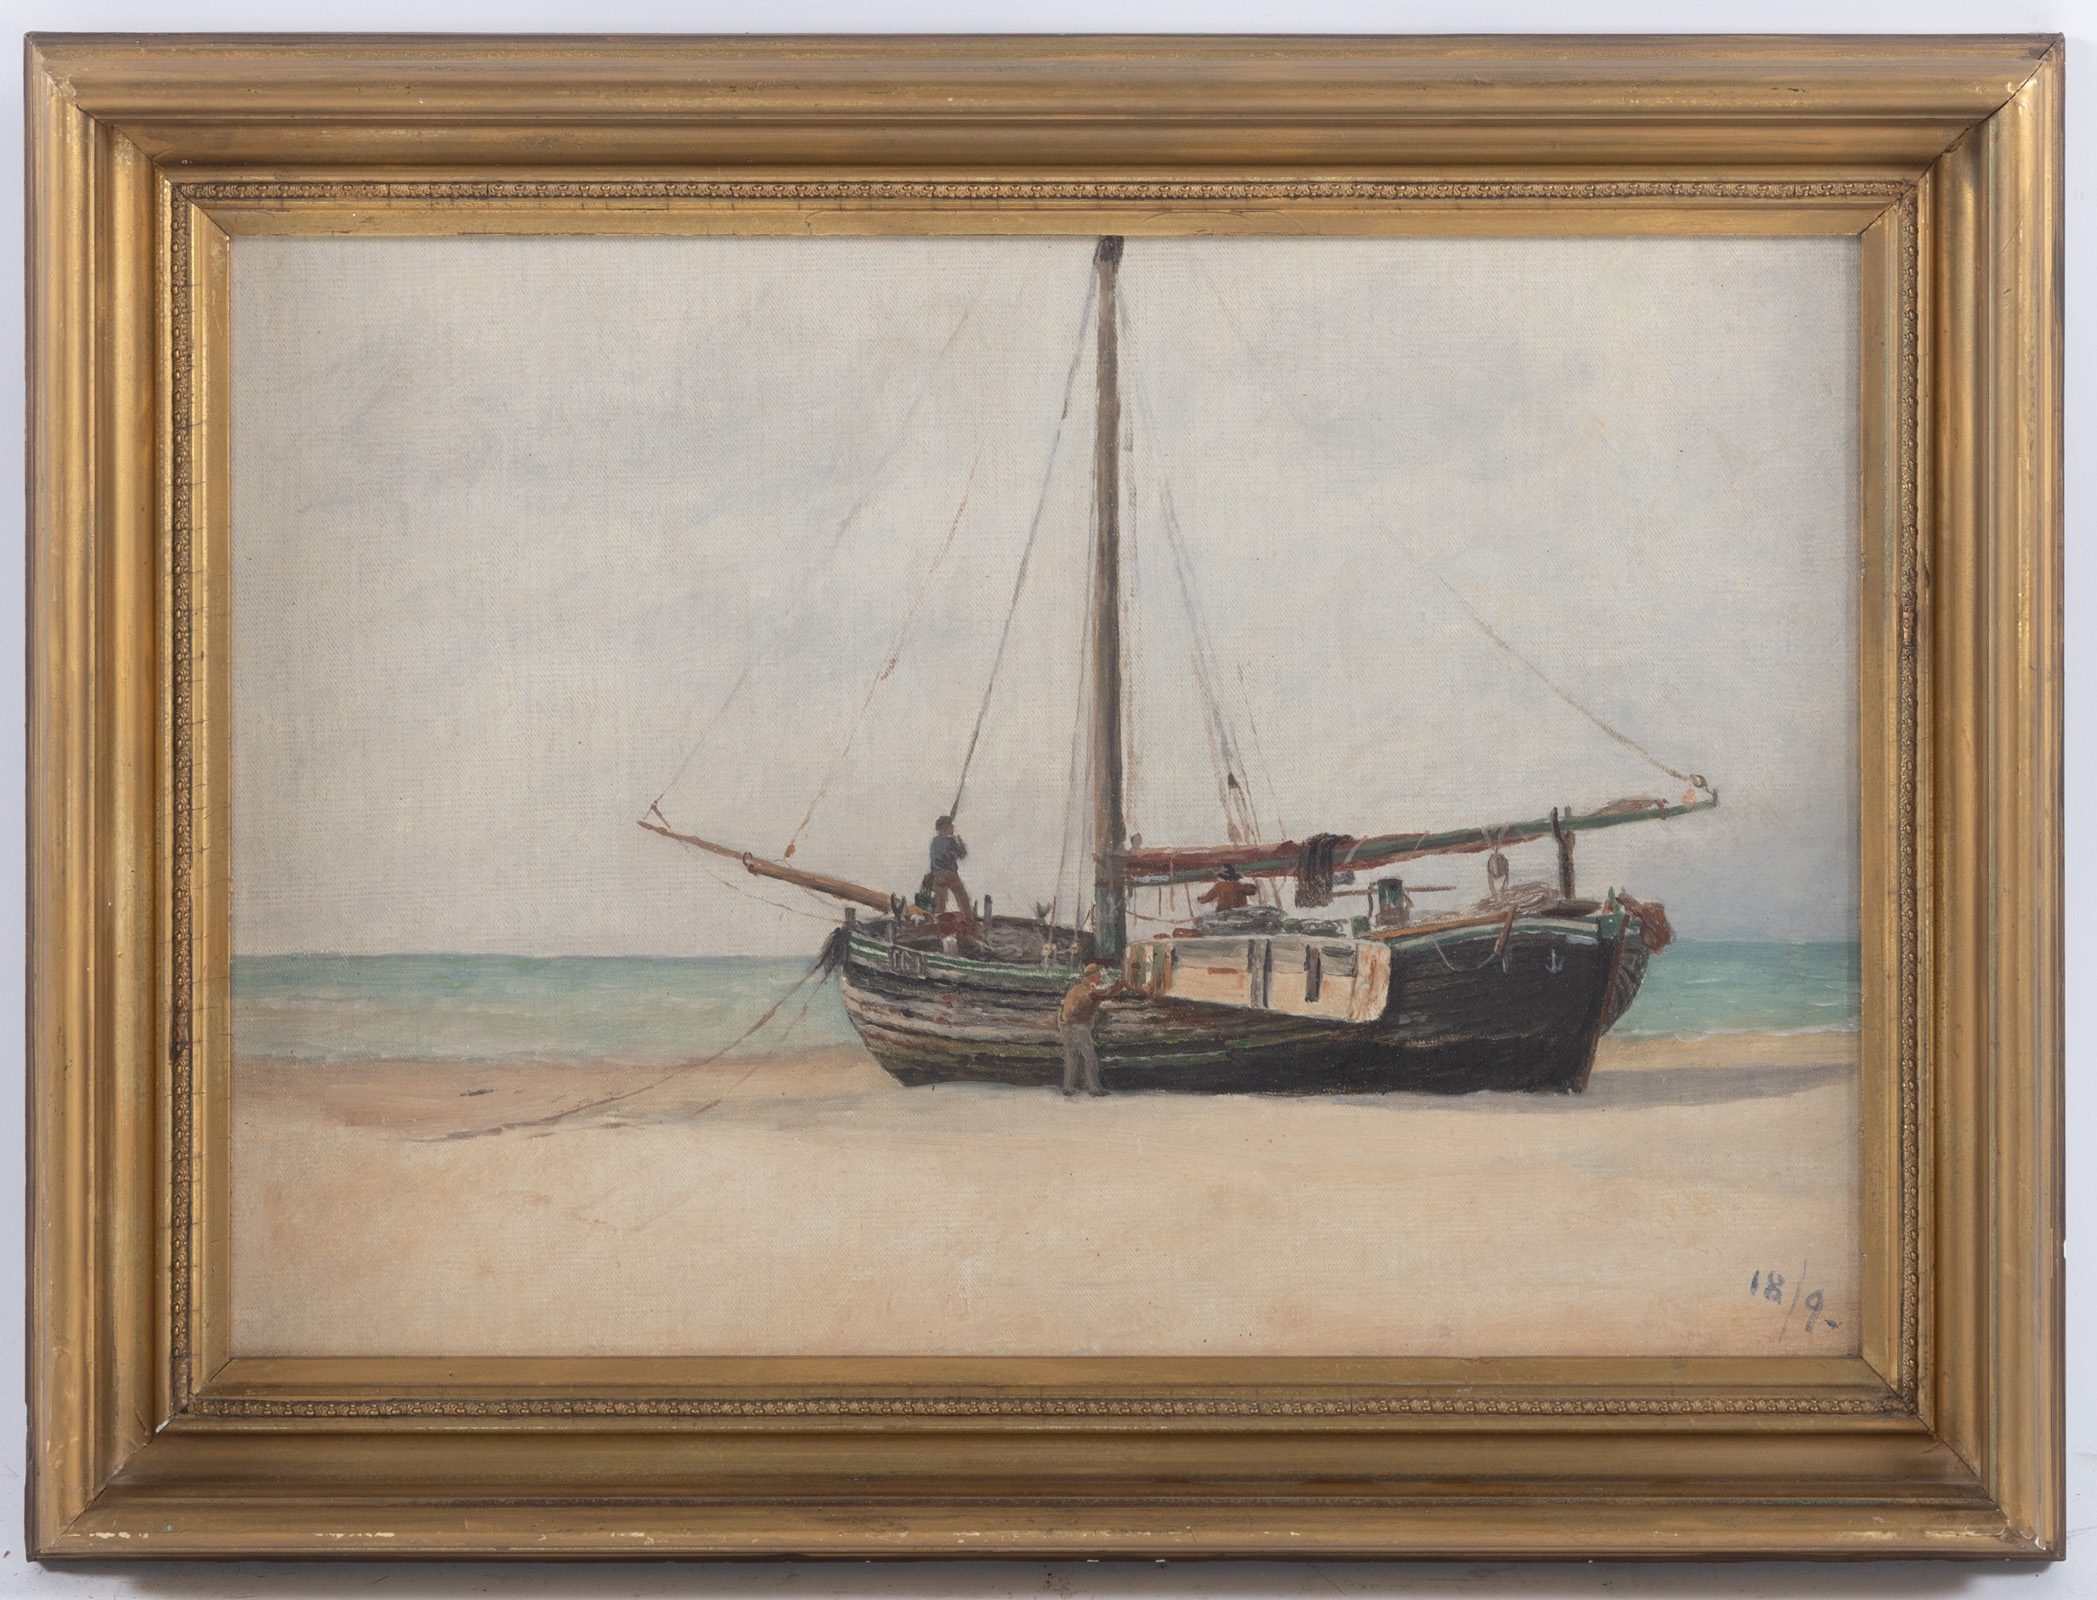 FISHERMAN WITH BOAT, GICLEE Giclee